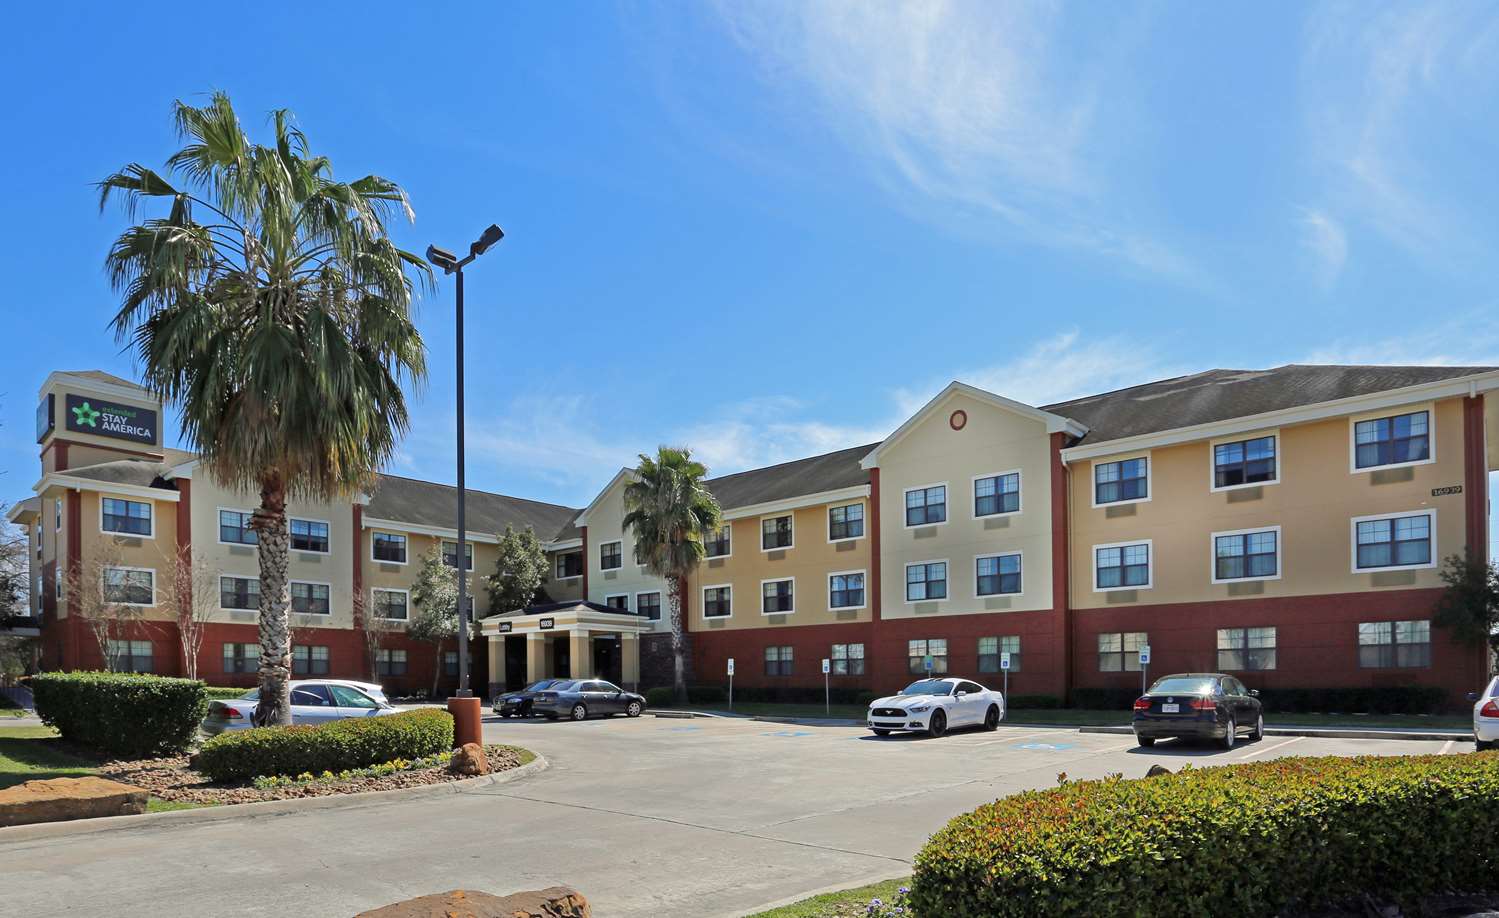 Pet Friendly Extended Stay America Houston - Willowbrook - Hwy 249 in Houston, Texas